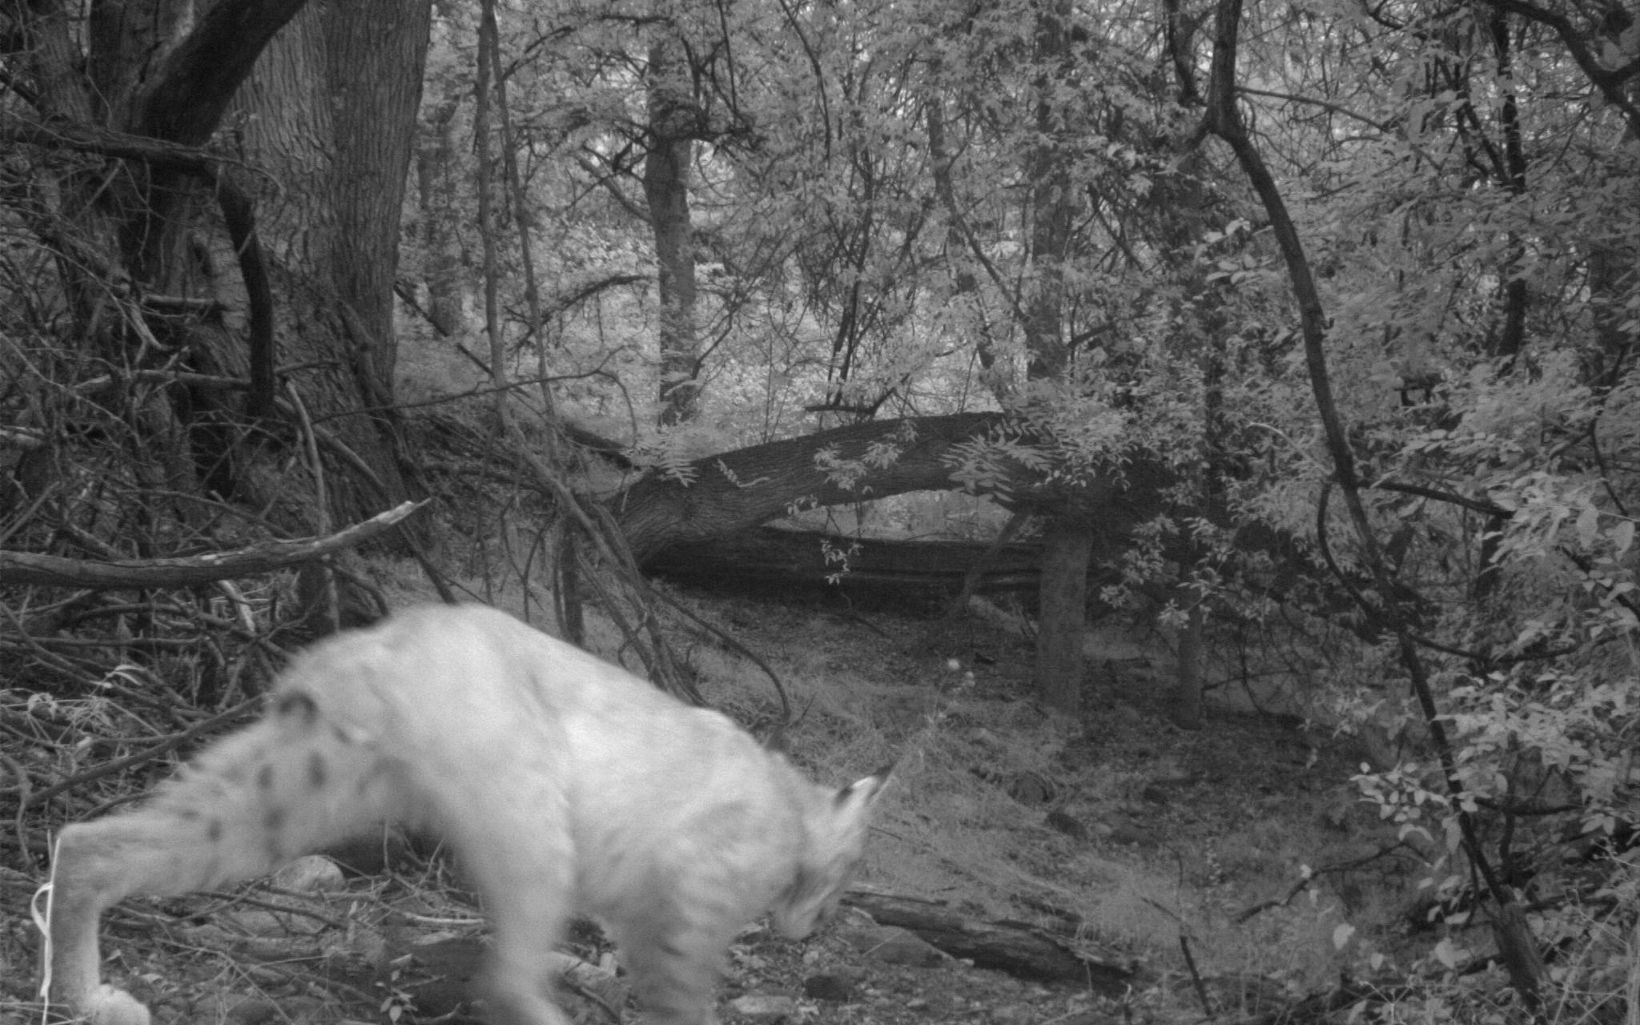 Bobcat at night walks in front of the trail camera.